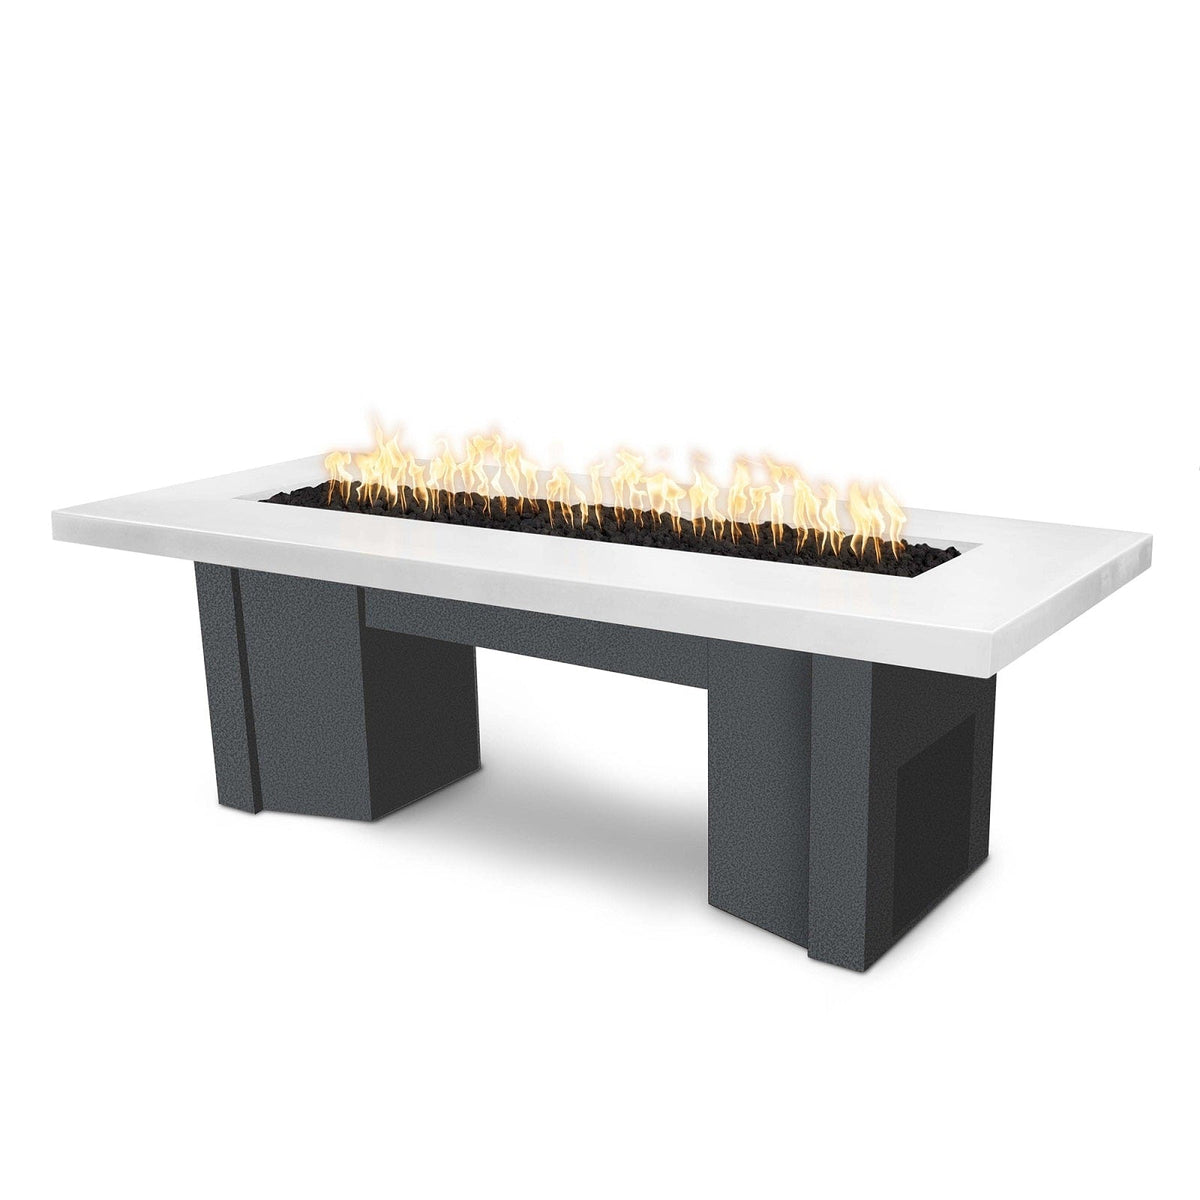 The Outdoor Plus Fire Features Limestone (-LIM) / Silver Vein Powder Coated Steel (-SLV) The Outdoor Plus 60&quot; Alameda Fire Table Smooth Concrete in Liquid Propane - 110V Plug &amp; Play Electronic Ignition / OPT-ALMGFRC60EKIT-LP